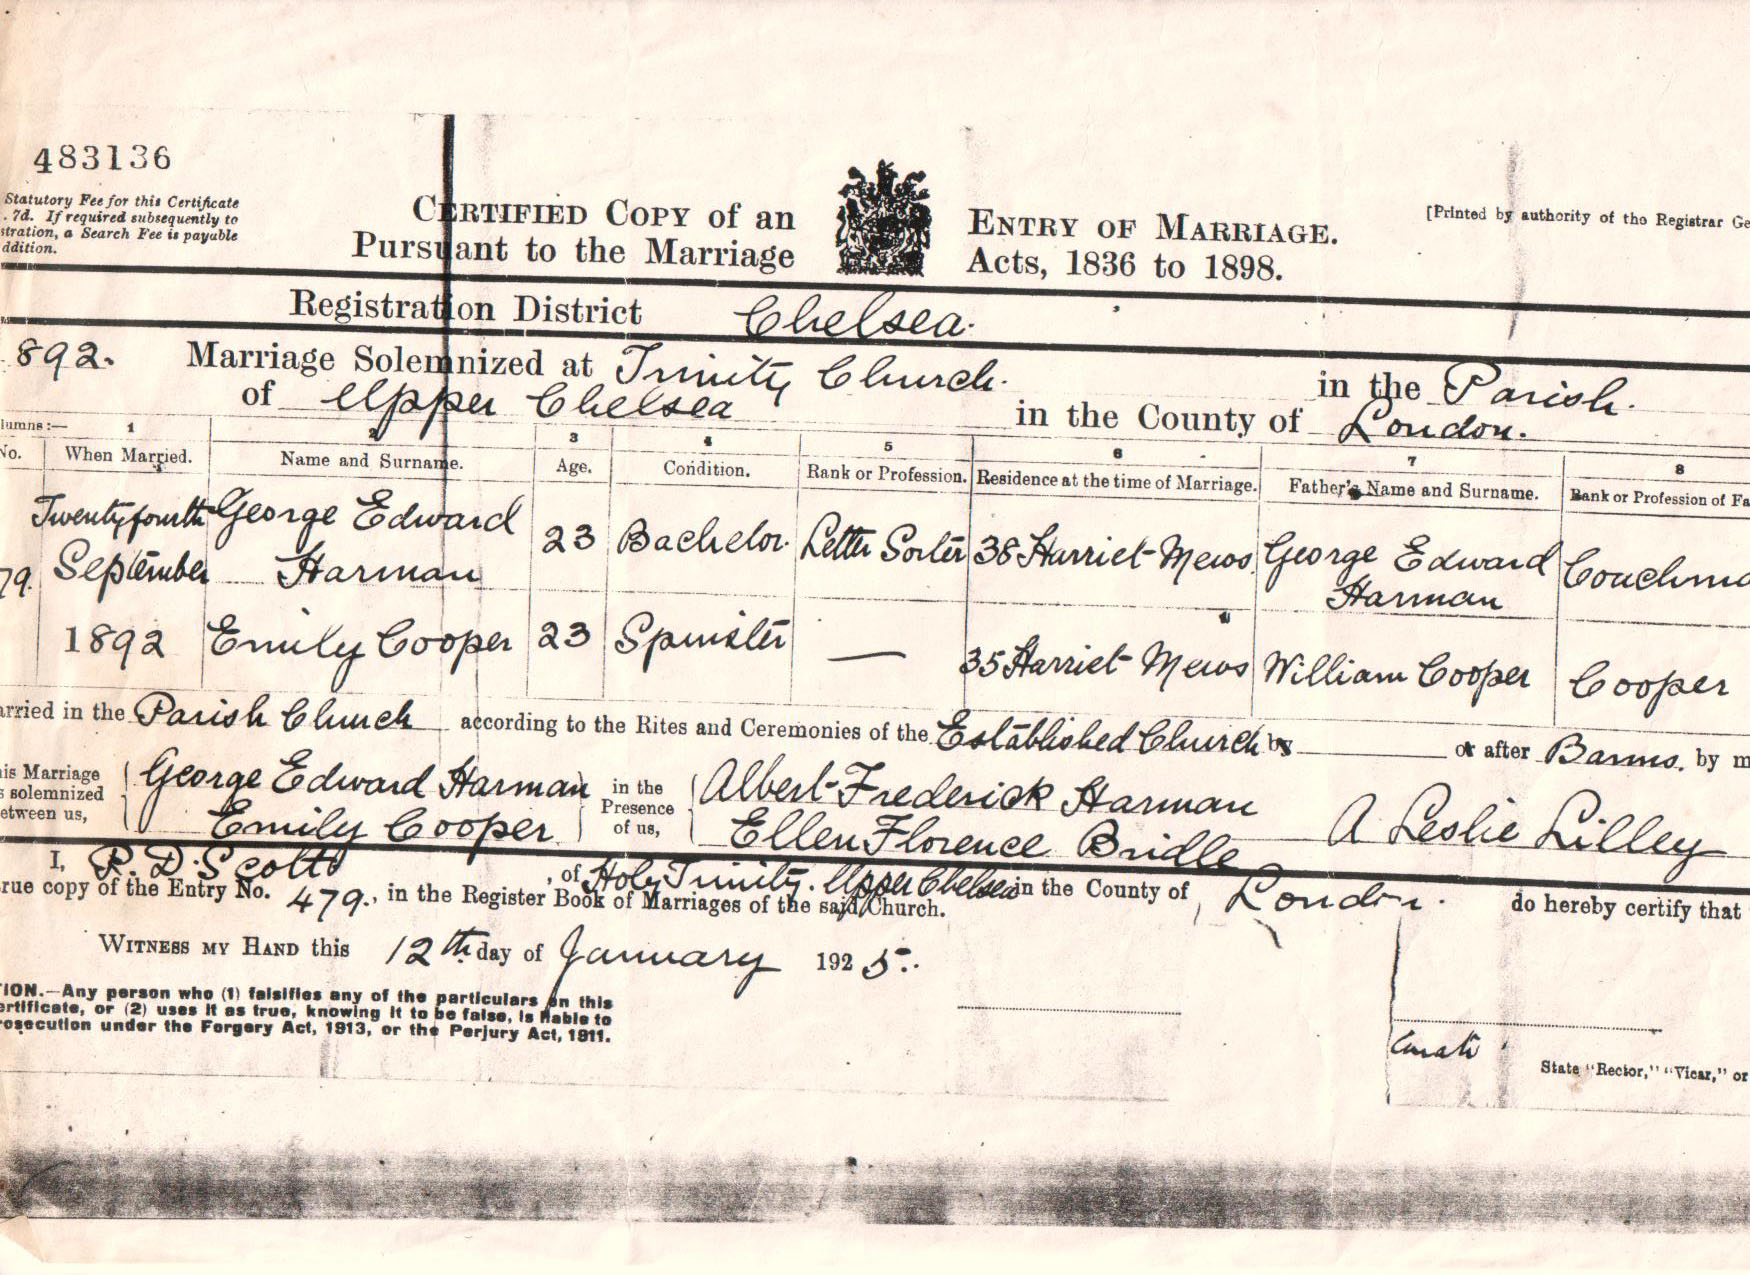 1892 marriage of Emily Cooper to George Edward Harman